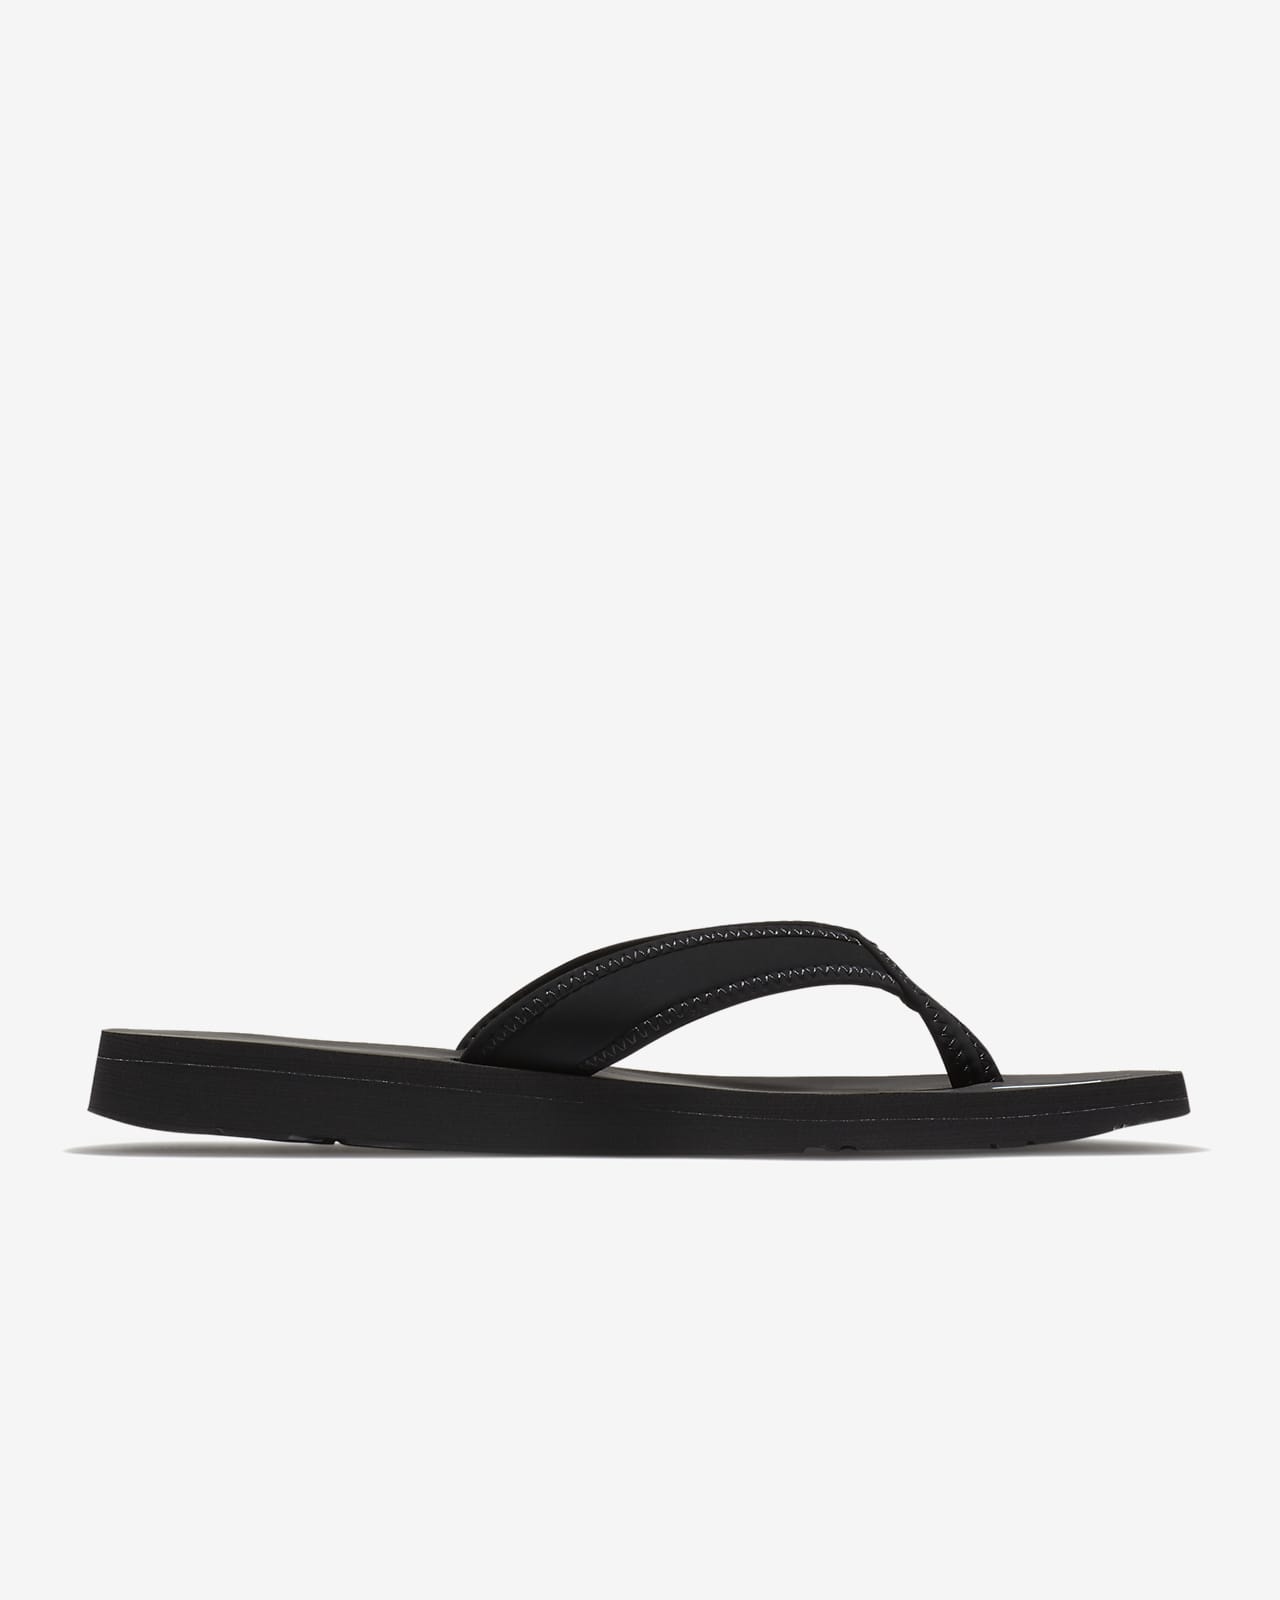 https://static.nike.com/a/images/t_PDP_1280_v1/f_auto,q_auto:eco/h3oawm32dhpibwr3syyj/celso-girl-womens-slides-9AwYMr.png